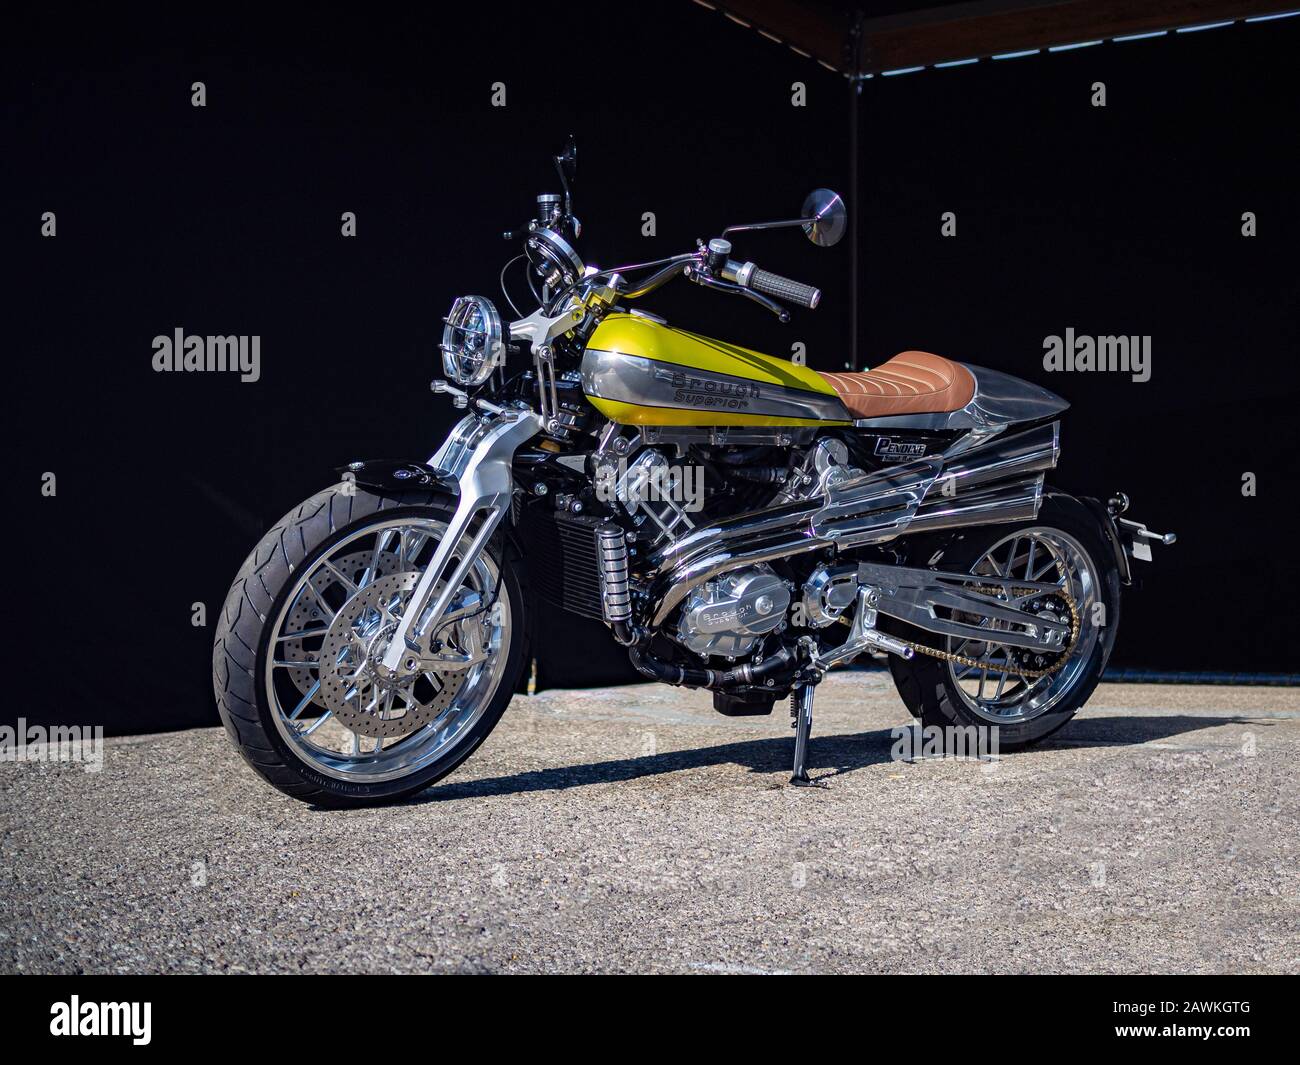 MONTMELO, SPAIN-SEPTEMBER 29, 2019: 2019 Brough Superior Pendine Sands Racer (Sport version) motorcycle Stock Photo